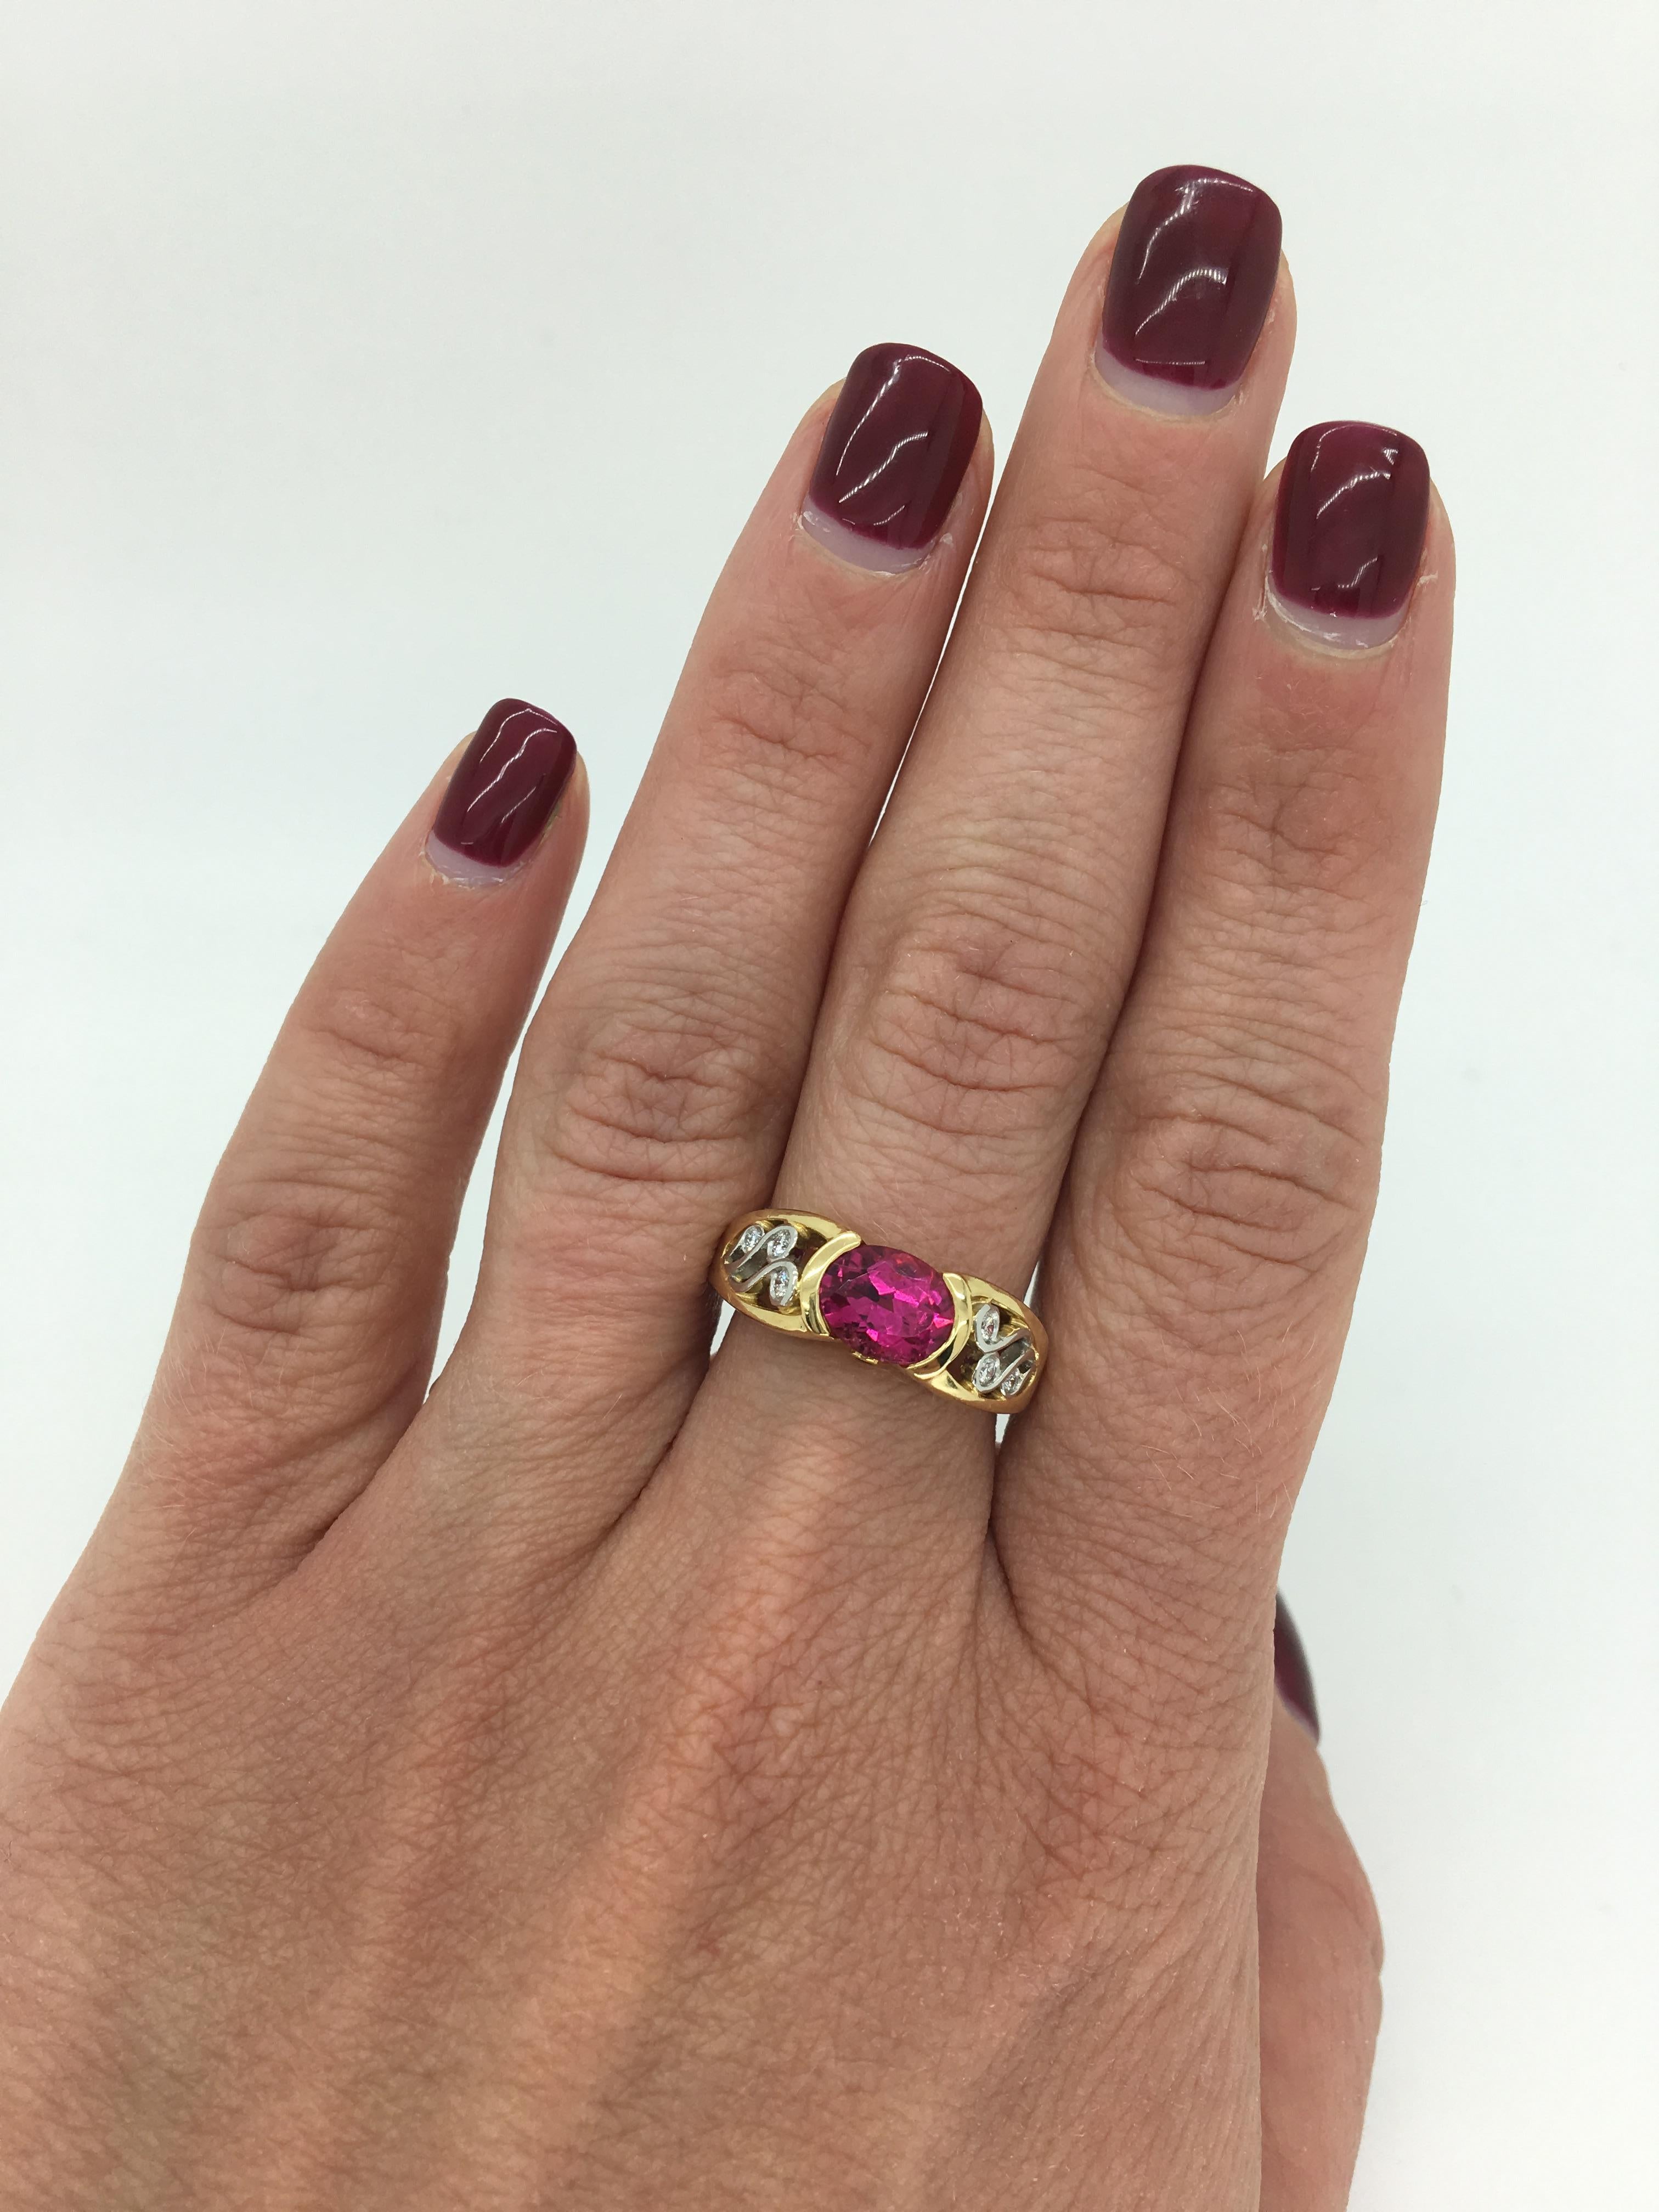 This 18K yellow gold ring features a vivid oval shaped Rubelite gemstone, 6 Round Brilliant Cut Diamonds and two Round Emeralds beautifully accent the featured stone.

Gemstone: Rubellite, Diamond and Emerald
Diamond Carat Weight: Approximately